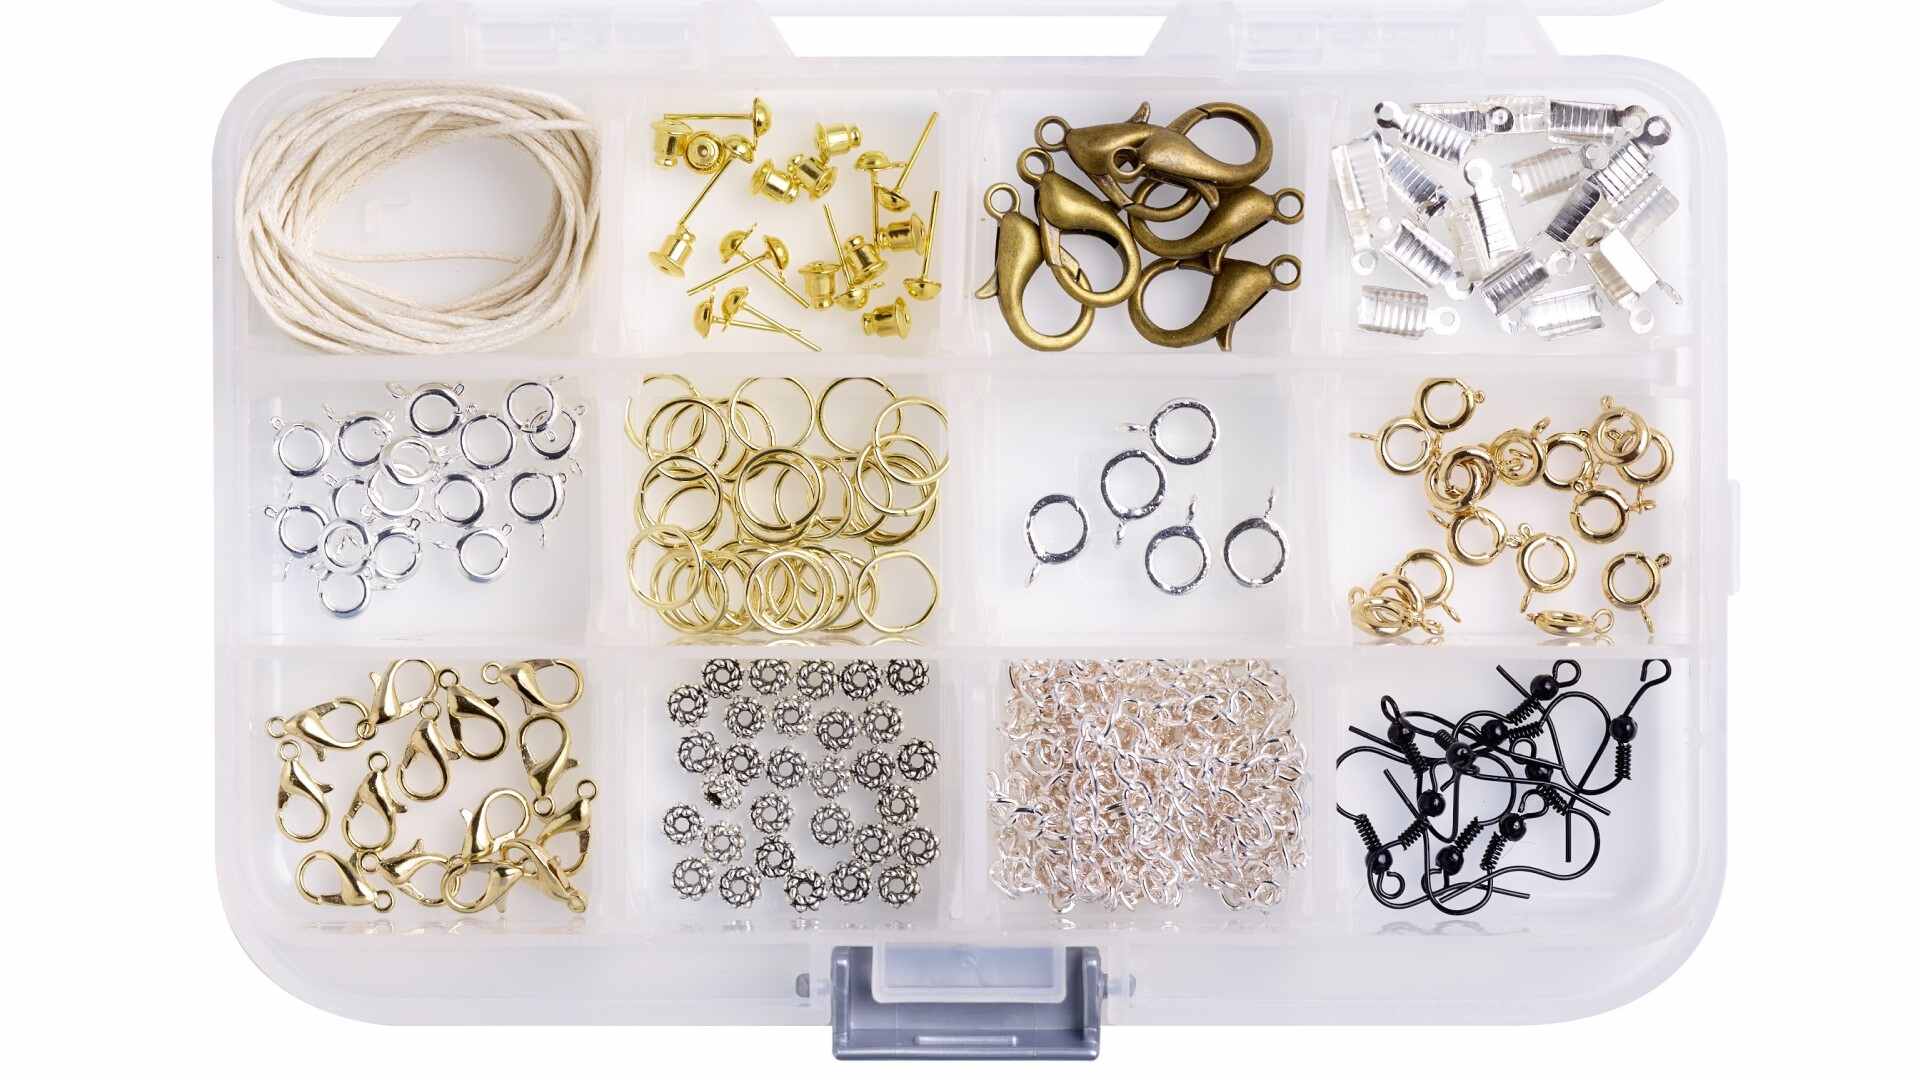 Assorted silver, gold and brass jewllery findings